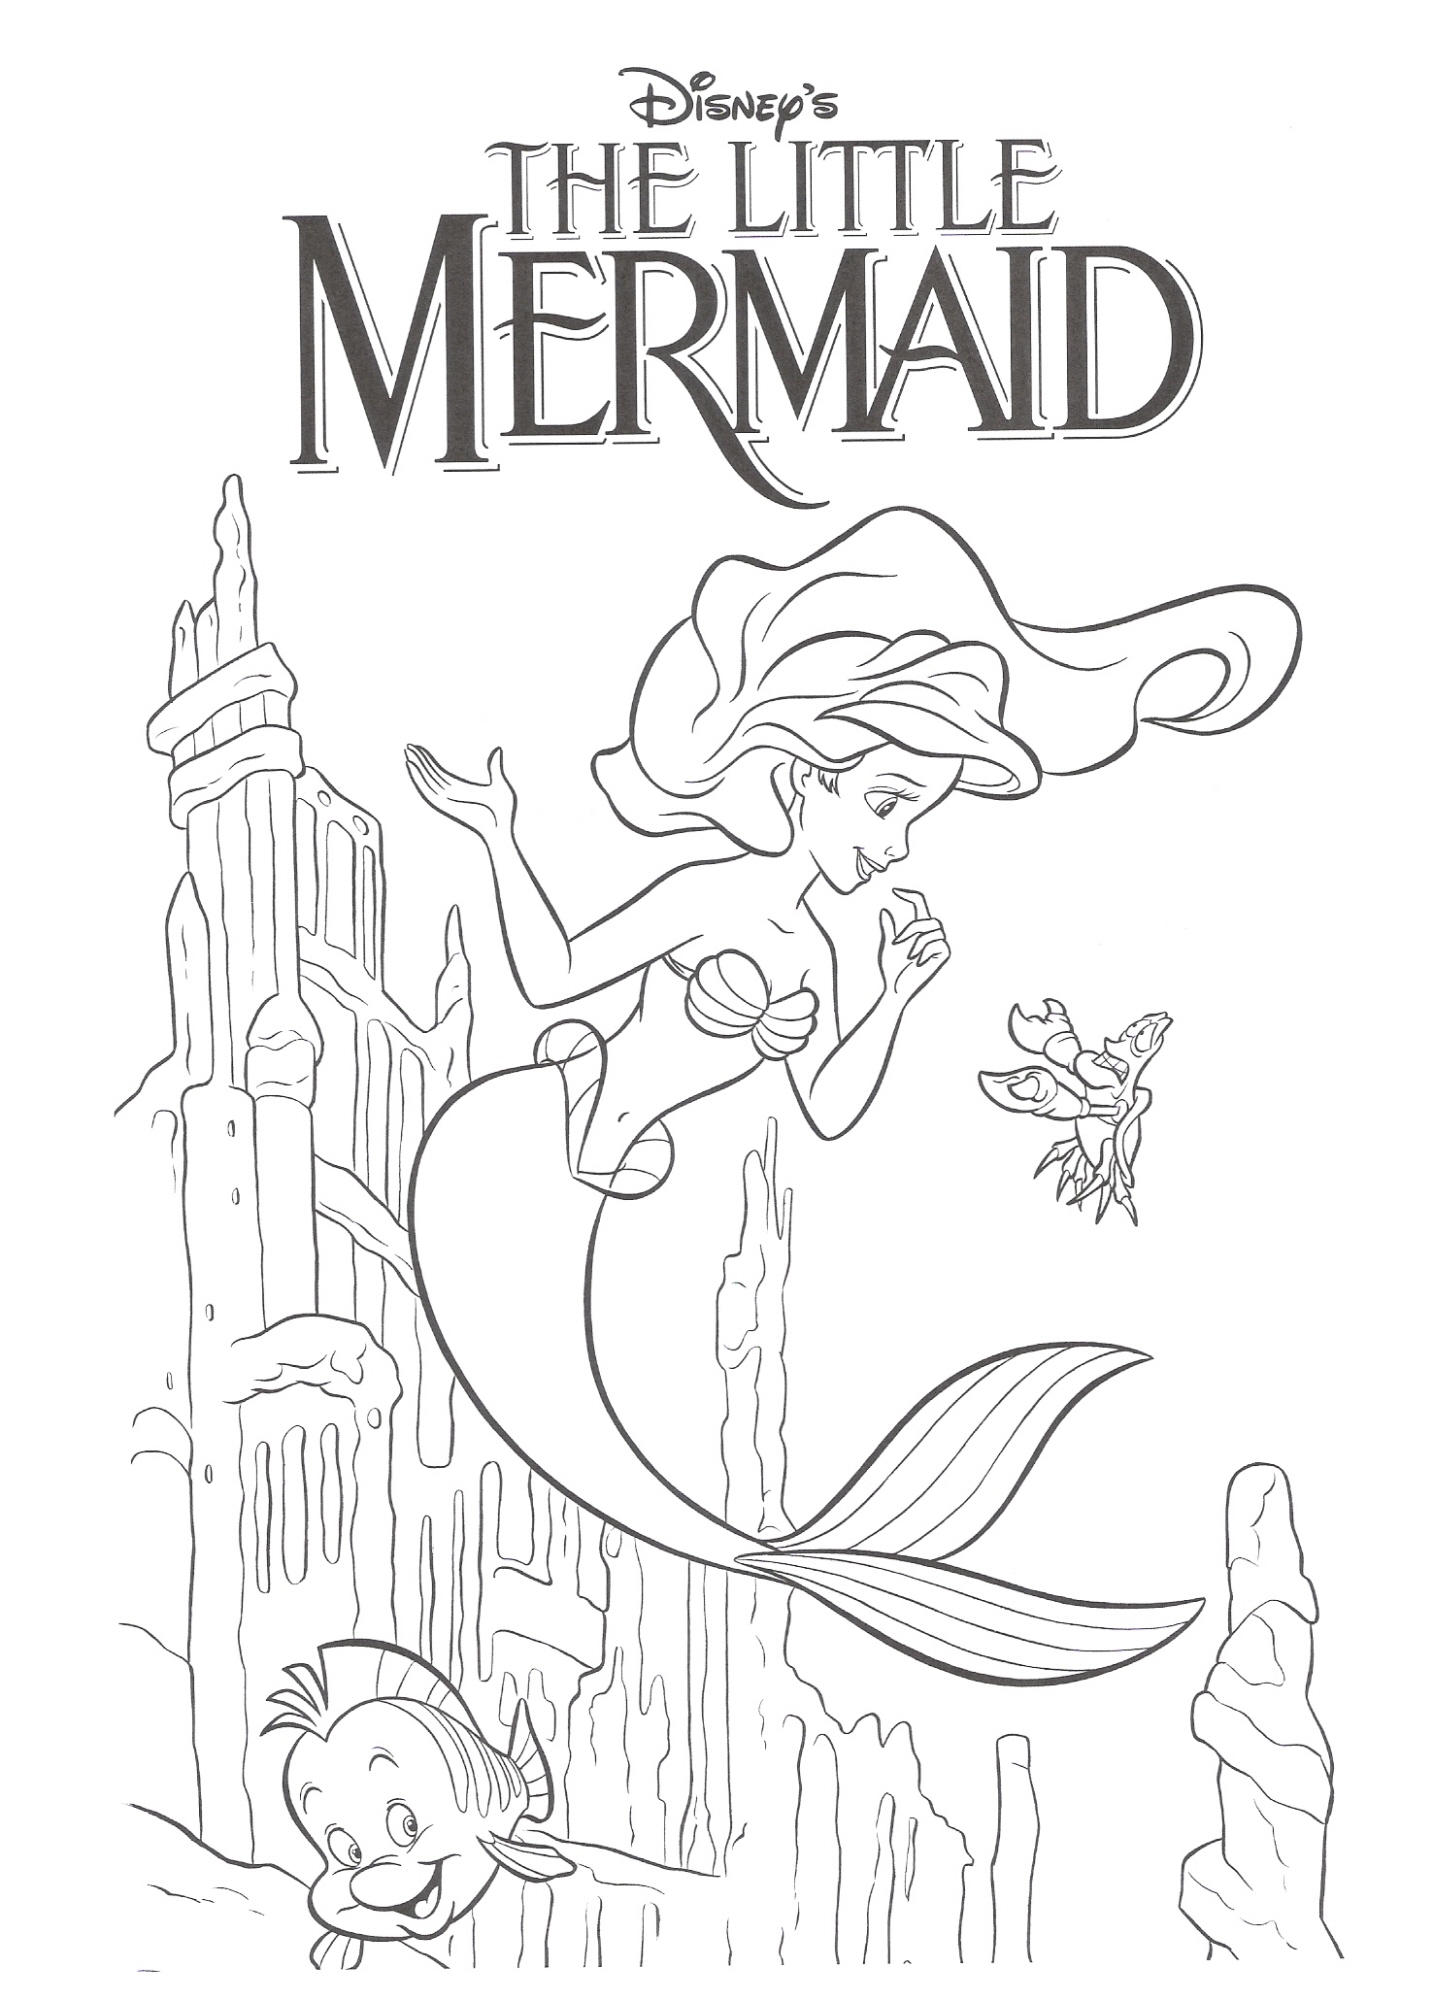 The Little Mermaid Coloring Pages9 Coloringkids